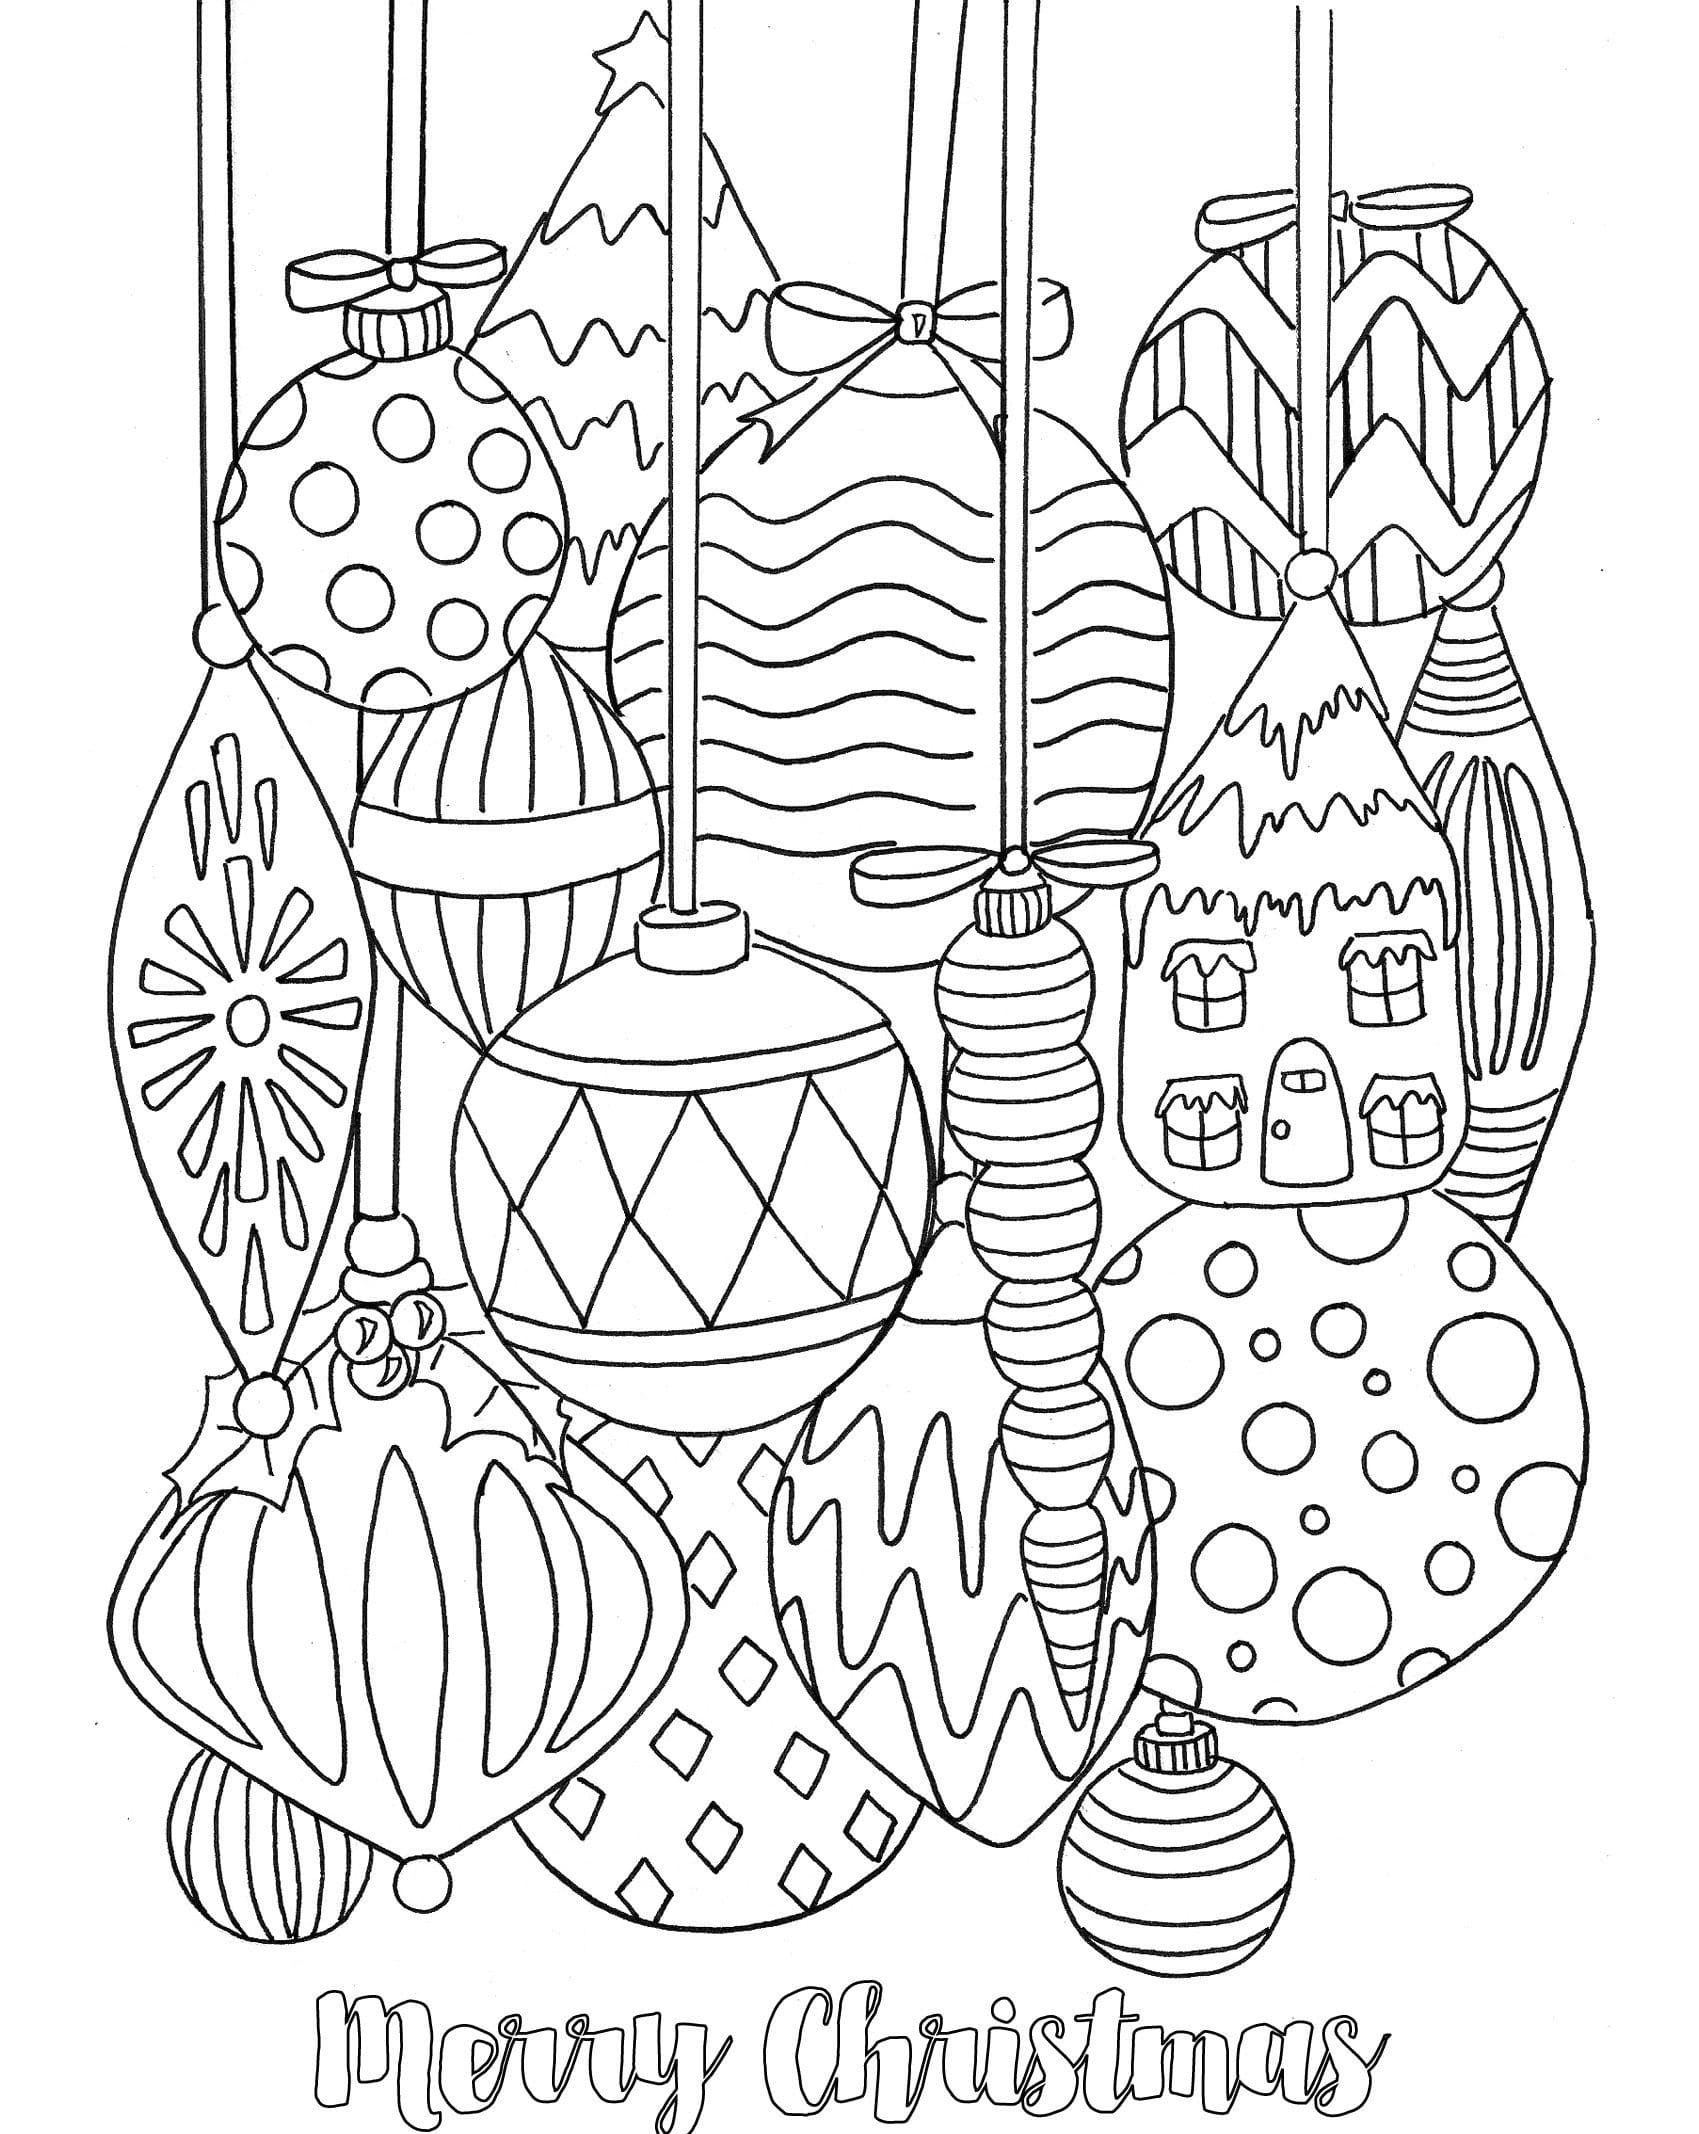 What Toy Will You Choose For Your Ate Coloring Page